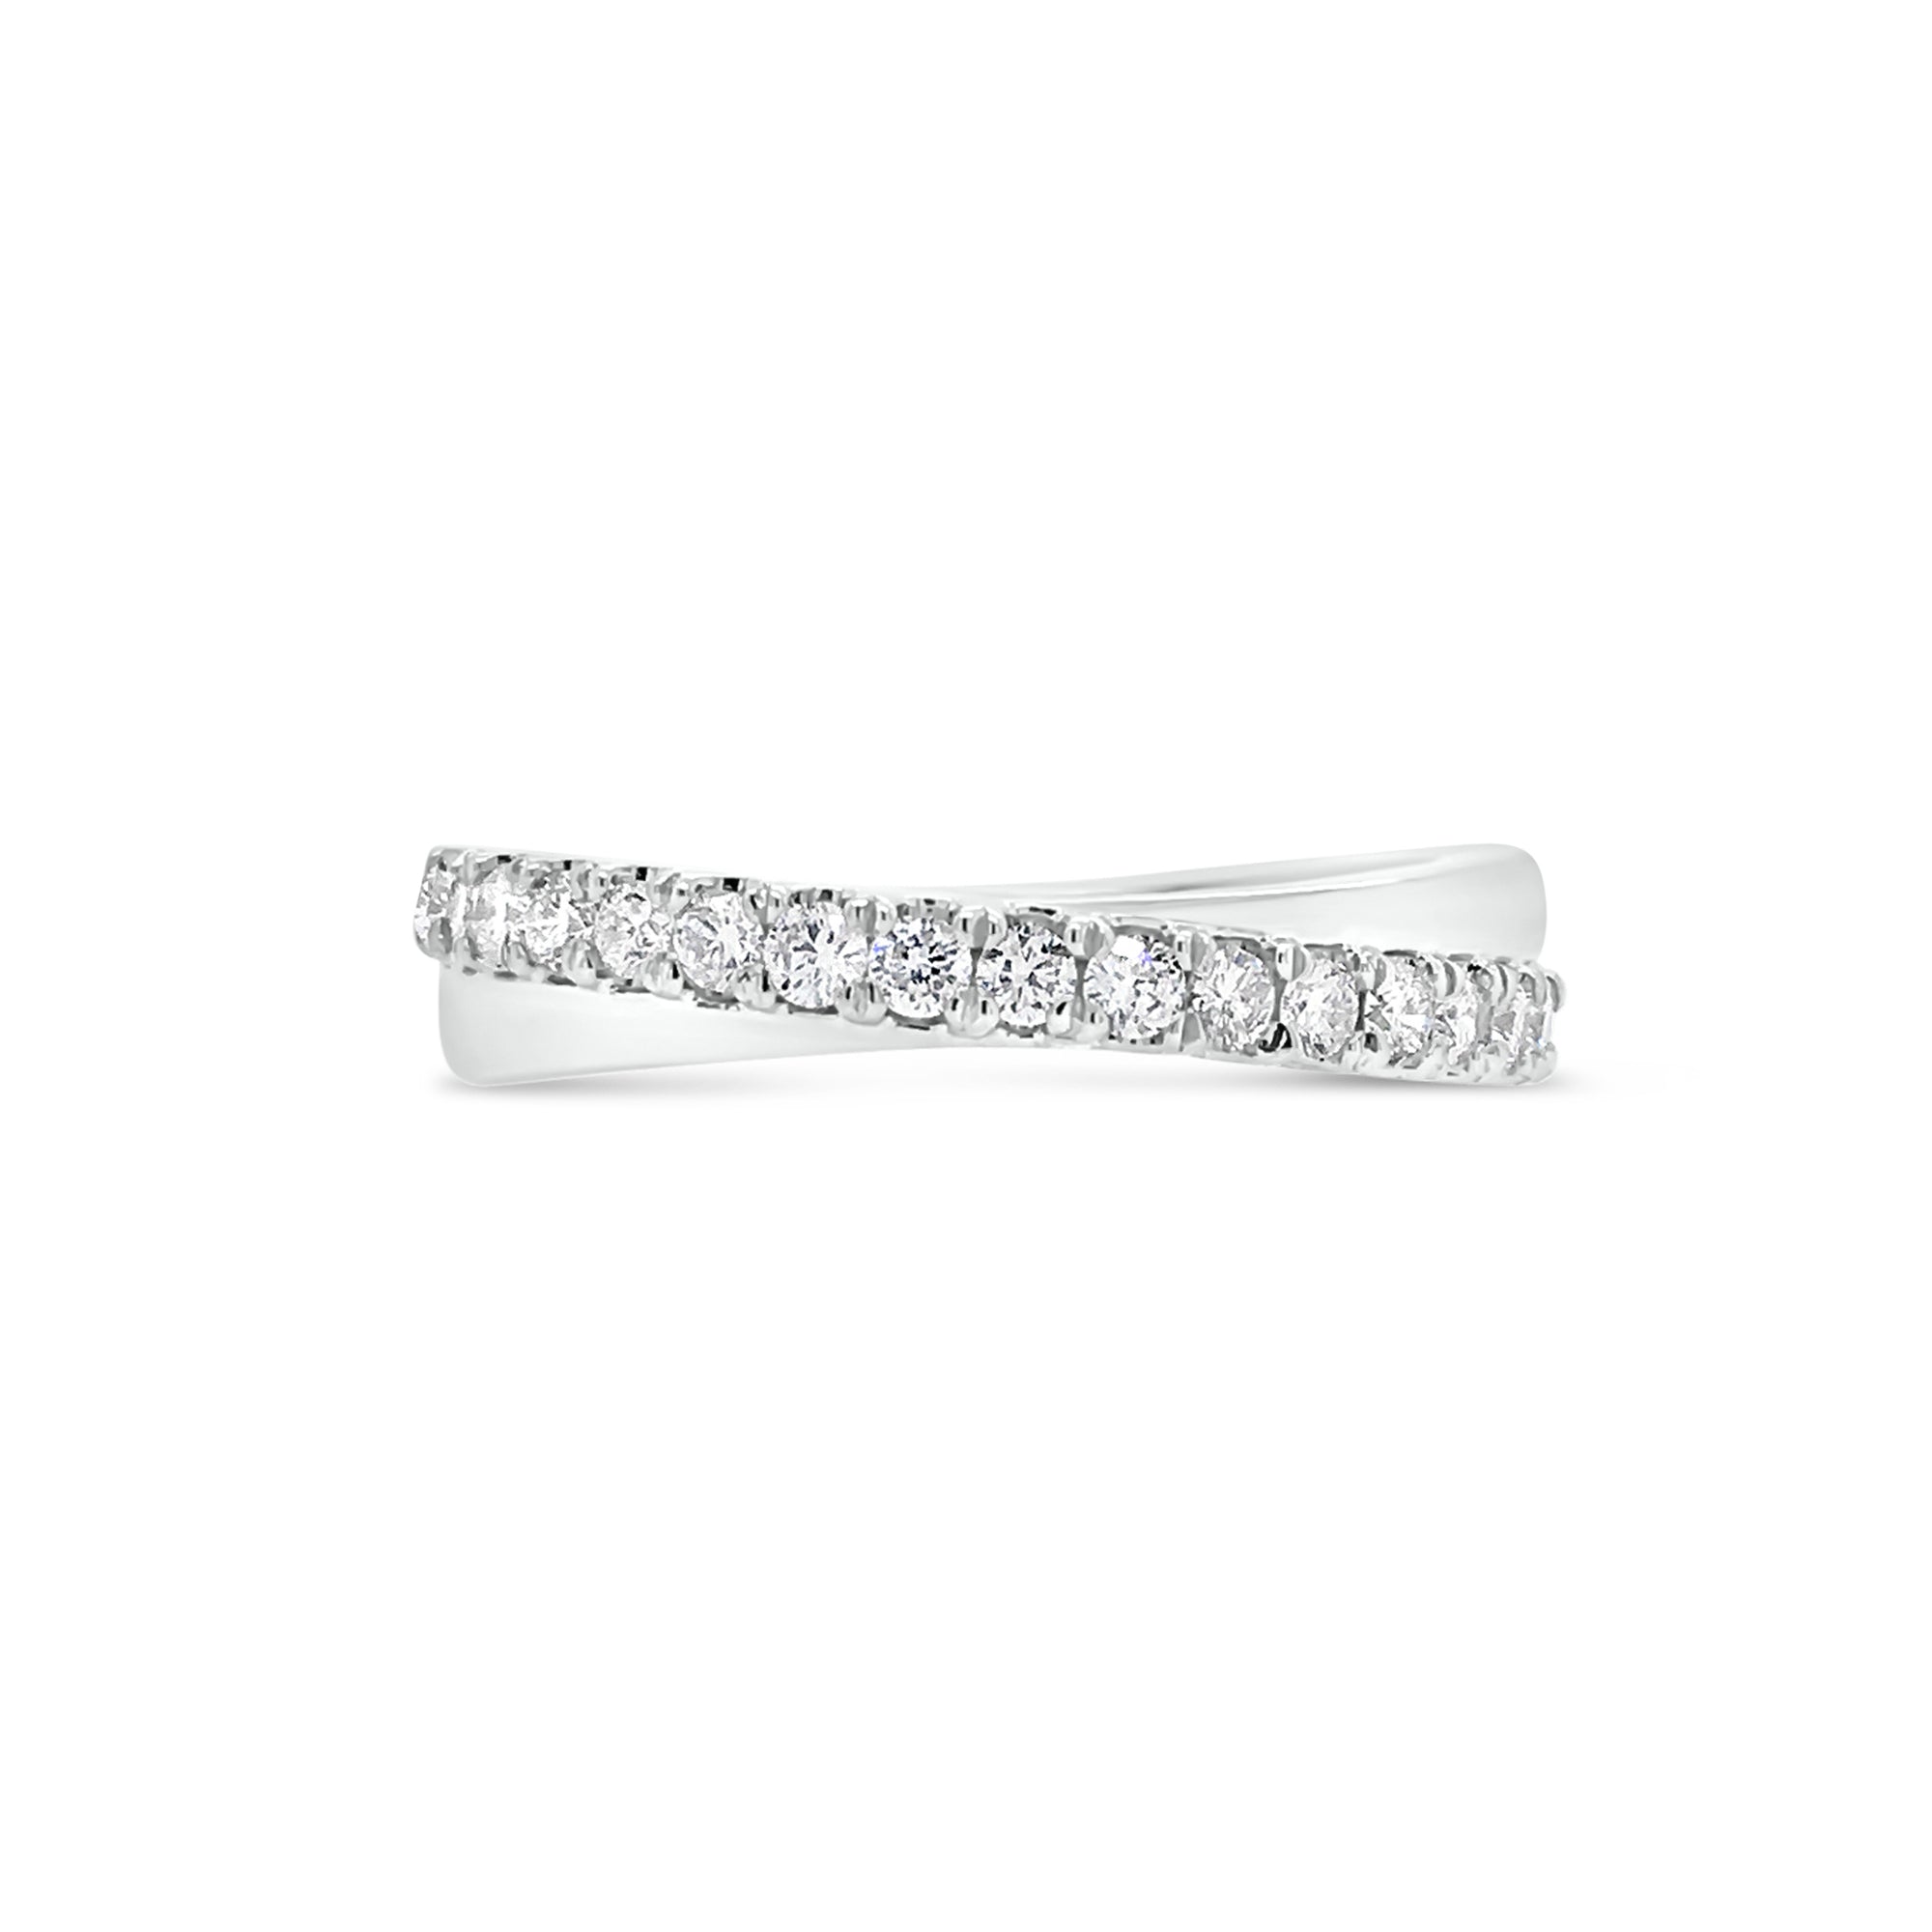 Diamond & gold crossover wedding band -14k gold weighing 3.60 grams  -25 round diamonds .54 carats